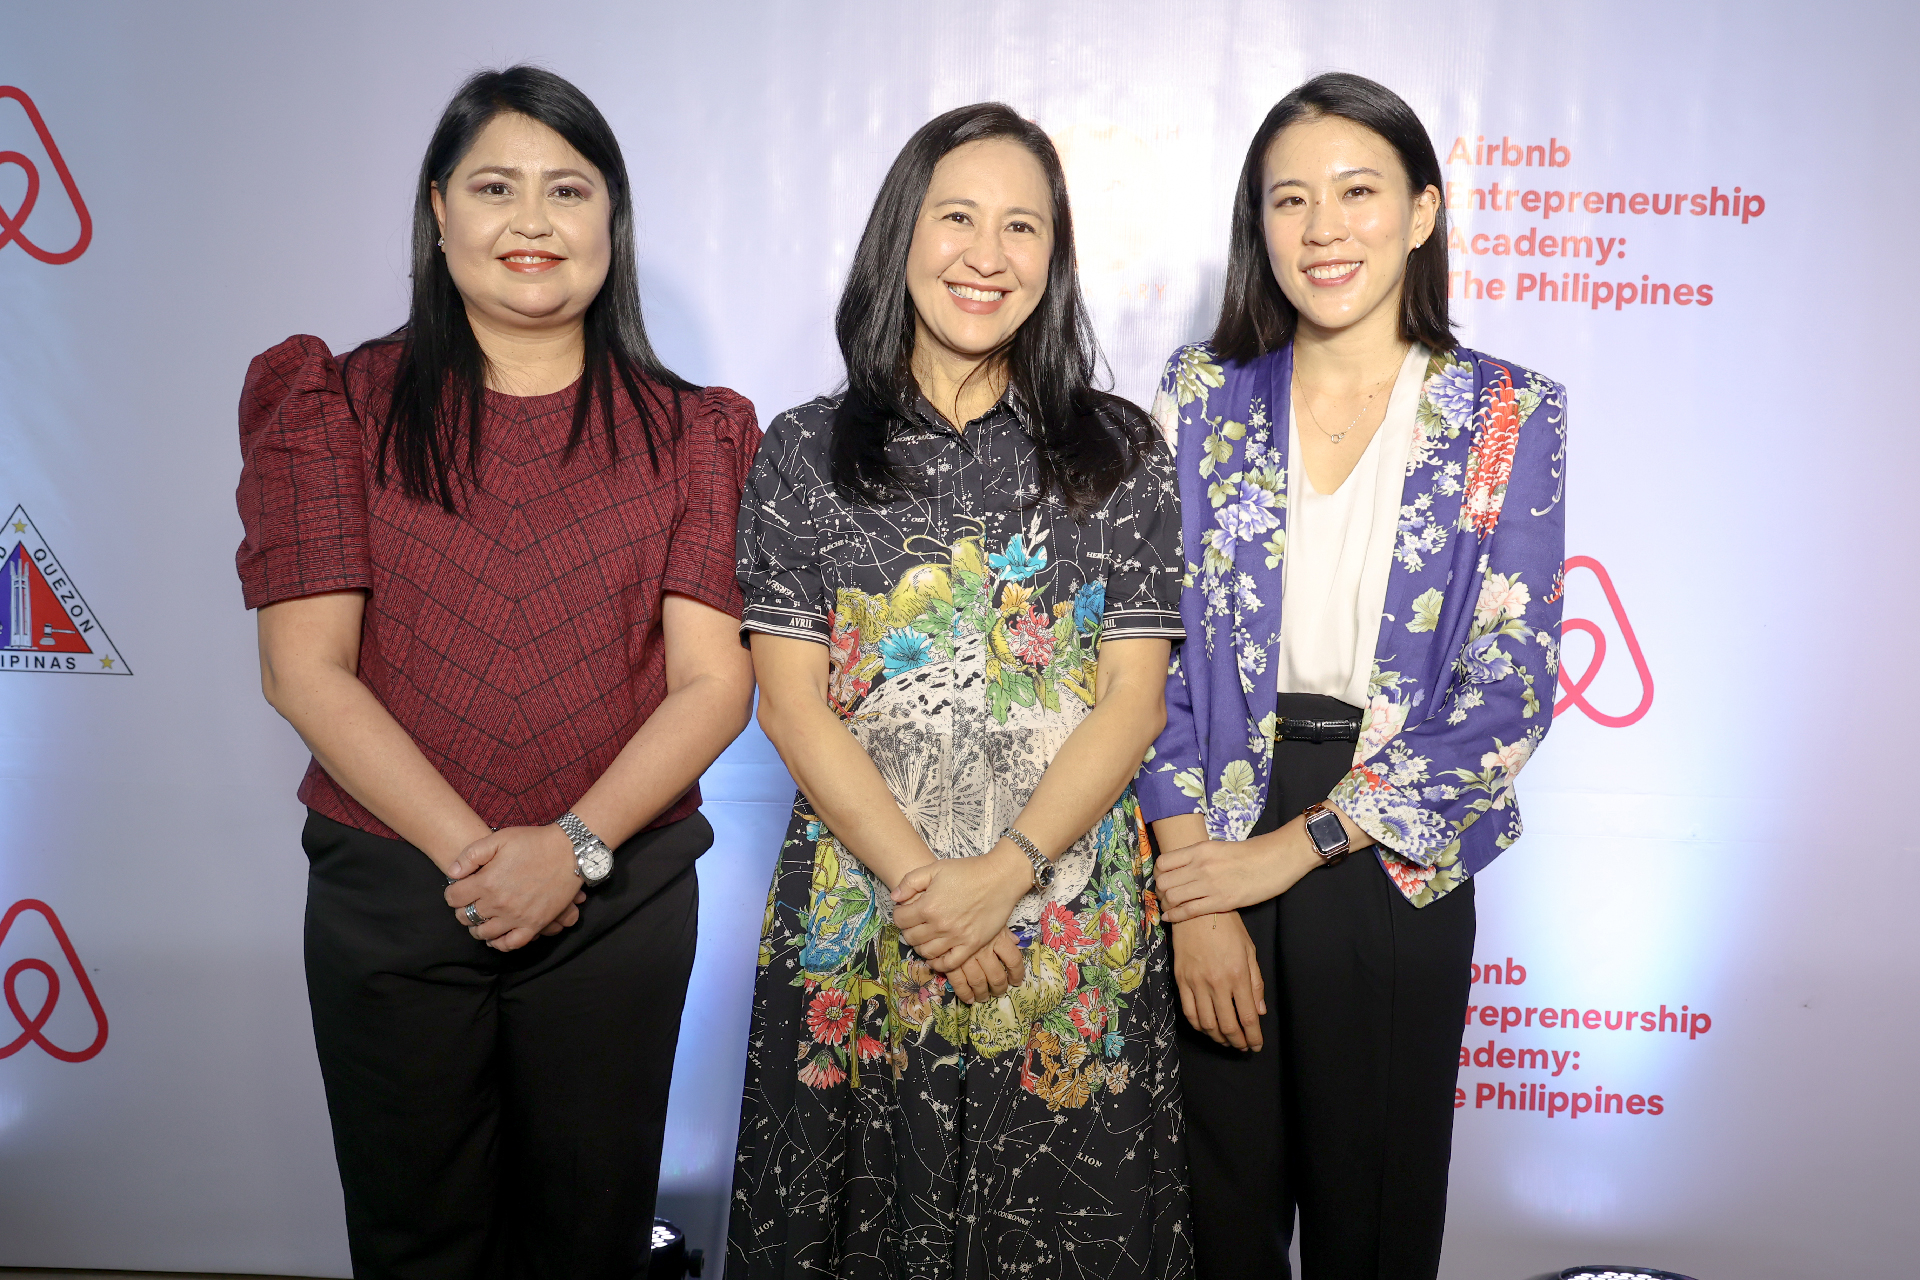 Airbnb signs an MoU with SPARK! to empower women tourism entrepreneurs in the Philippines